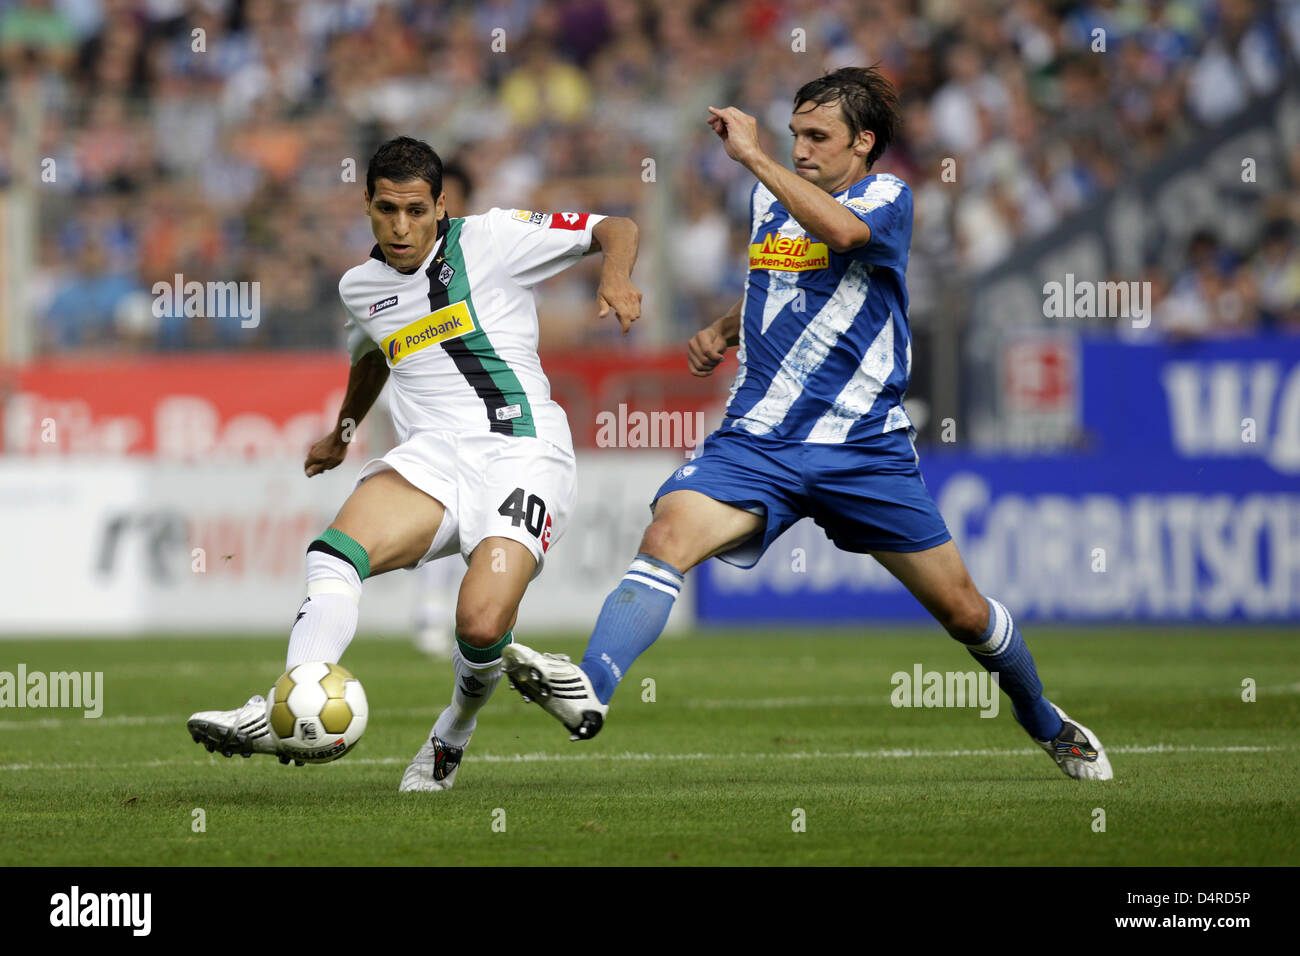 Bochum?s Daniel Imhof (R) and Moenchengladbach?s Karim Matmour vie for the ball during the German Bundesliga match VfL Bochum vs Borussia Moenchengladbach at rewirpower-stadium in Bochum, Germany, 09 August 2009. Photo: Rolf Vennenbernd dpa/lnw (ATTENTION: BLOCKING PERIOD! The DFL permits the further utilisation of the pictures in IPTV, mobile services and other new technologies on Stock Photo